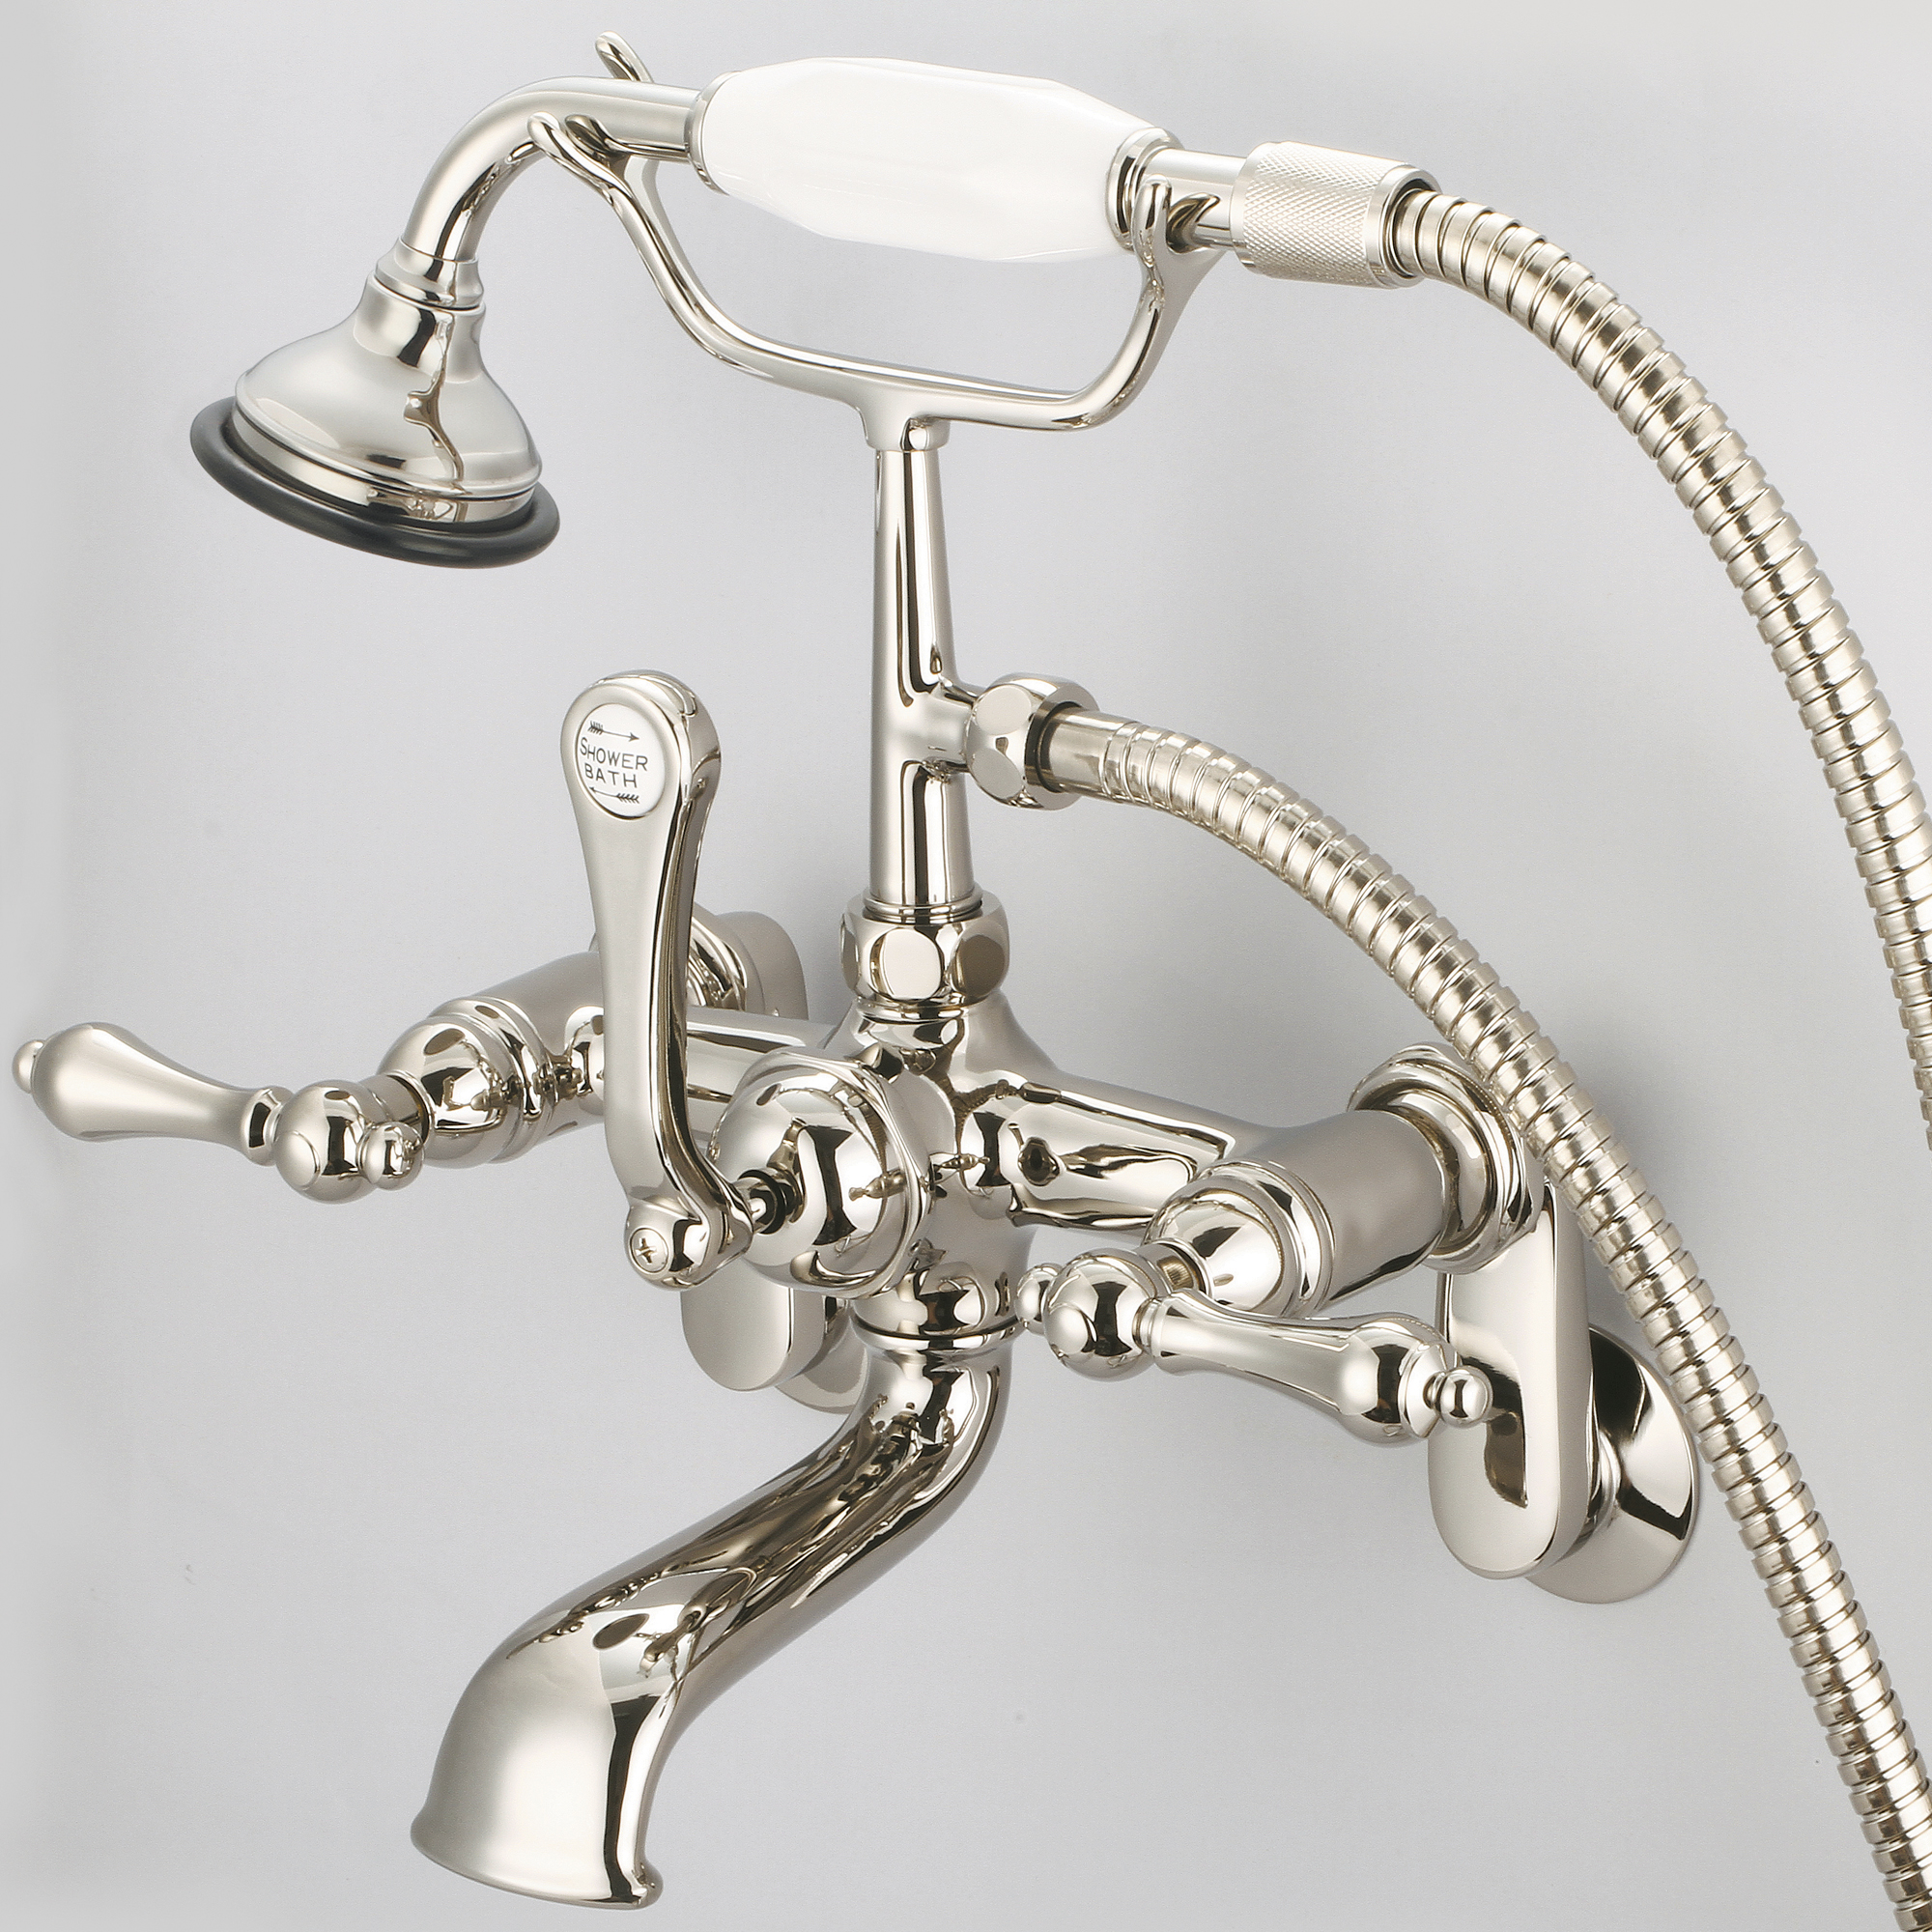 Vintage Classic Adjustable Center Wall Mount Tub Faucet With Swivel Wall Connector & Handheld Shower in Polished Nickel (PVD) Finish With Metal Lever Handles Without Labels